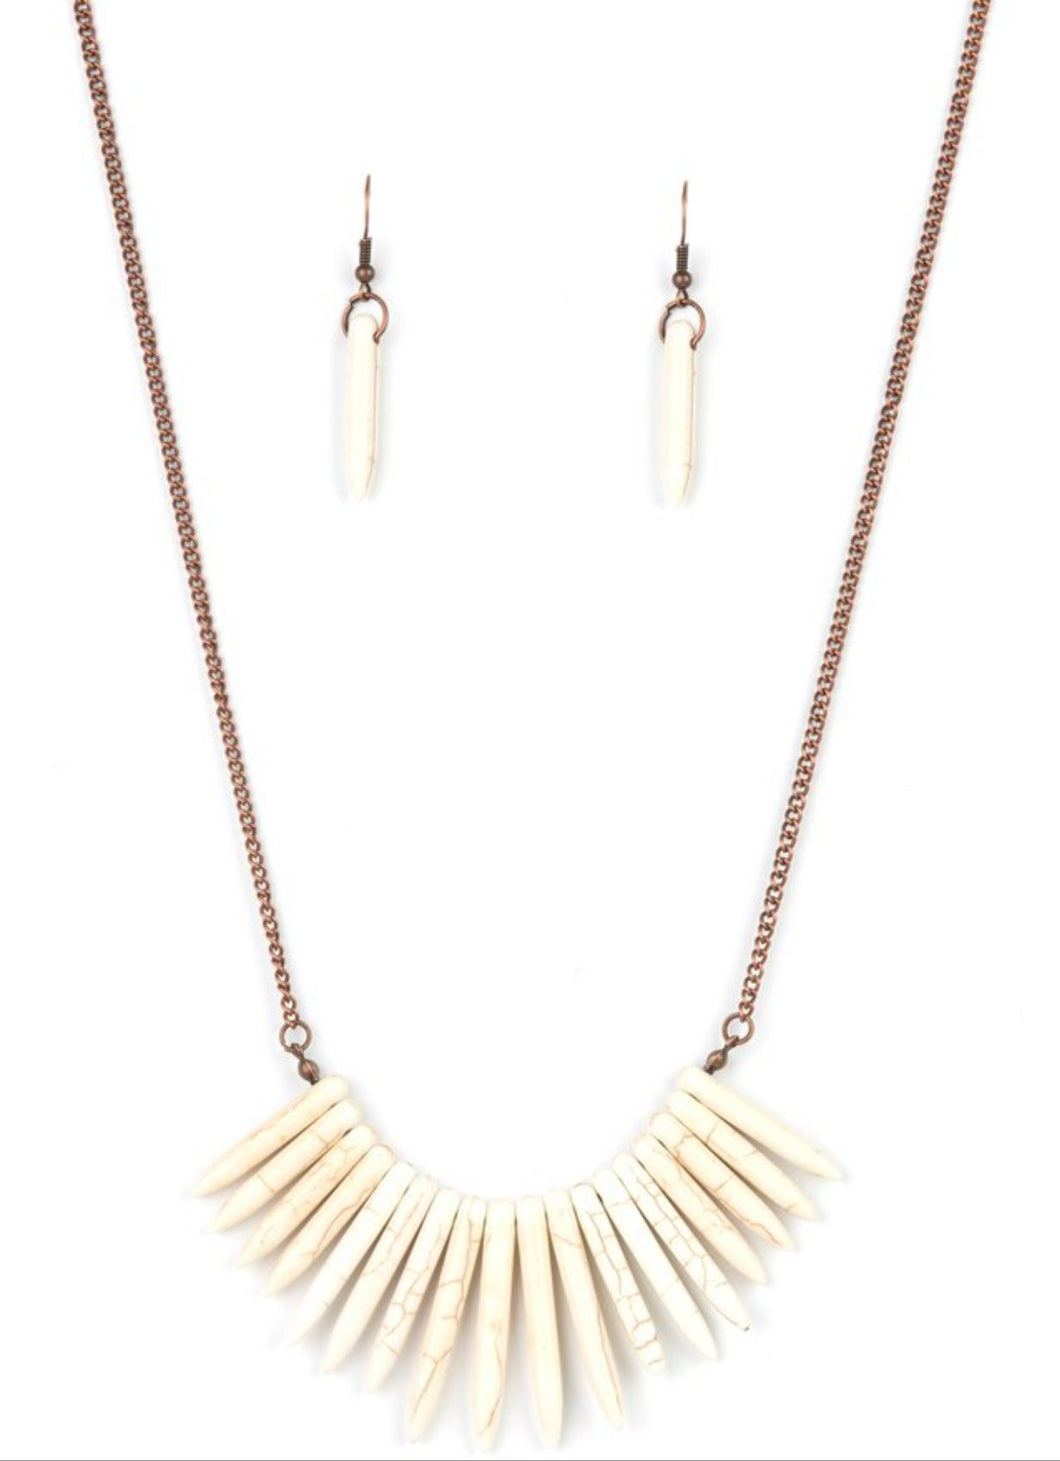 Exotic Edge White and Copper Necklace and Earrings